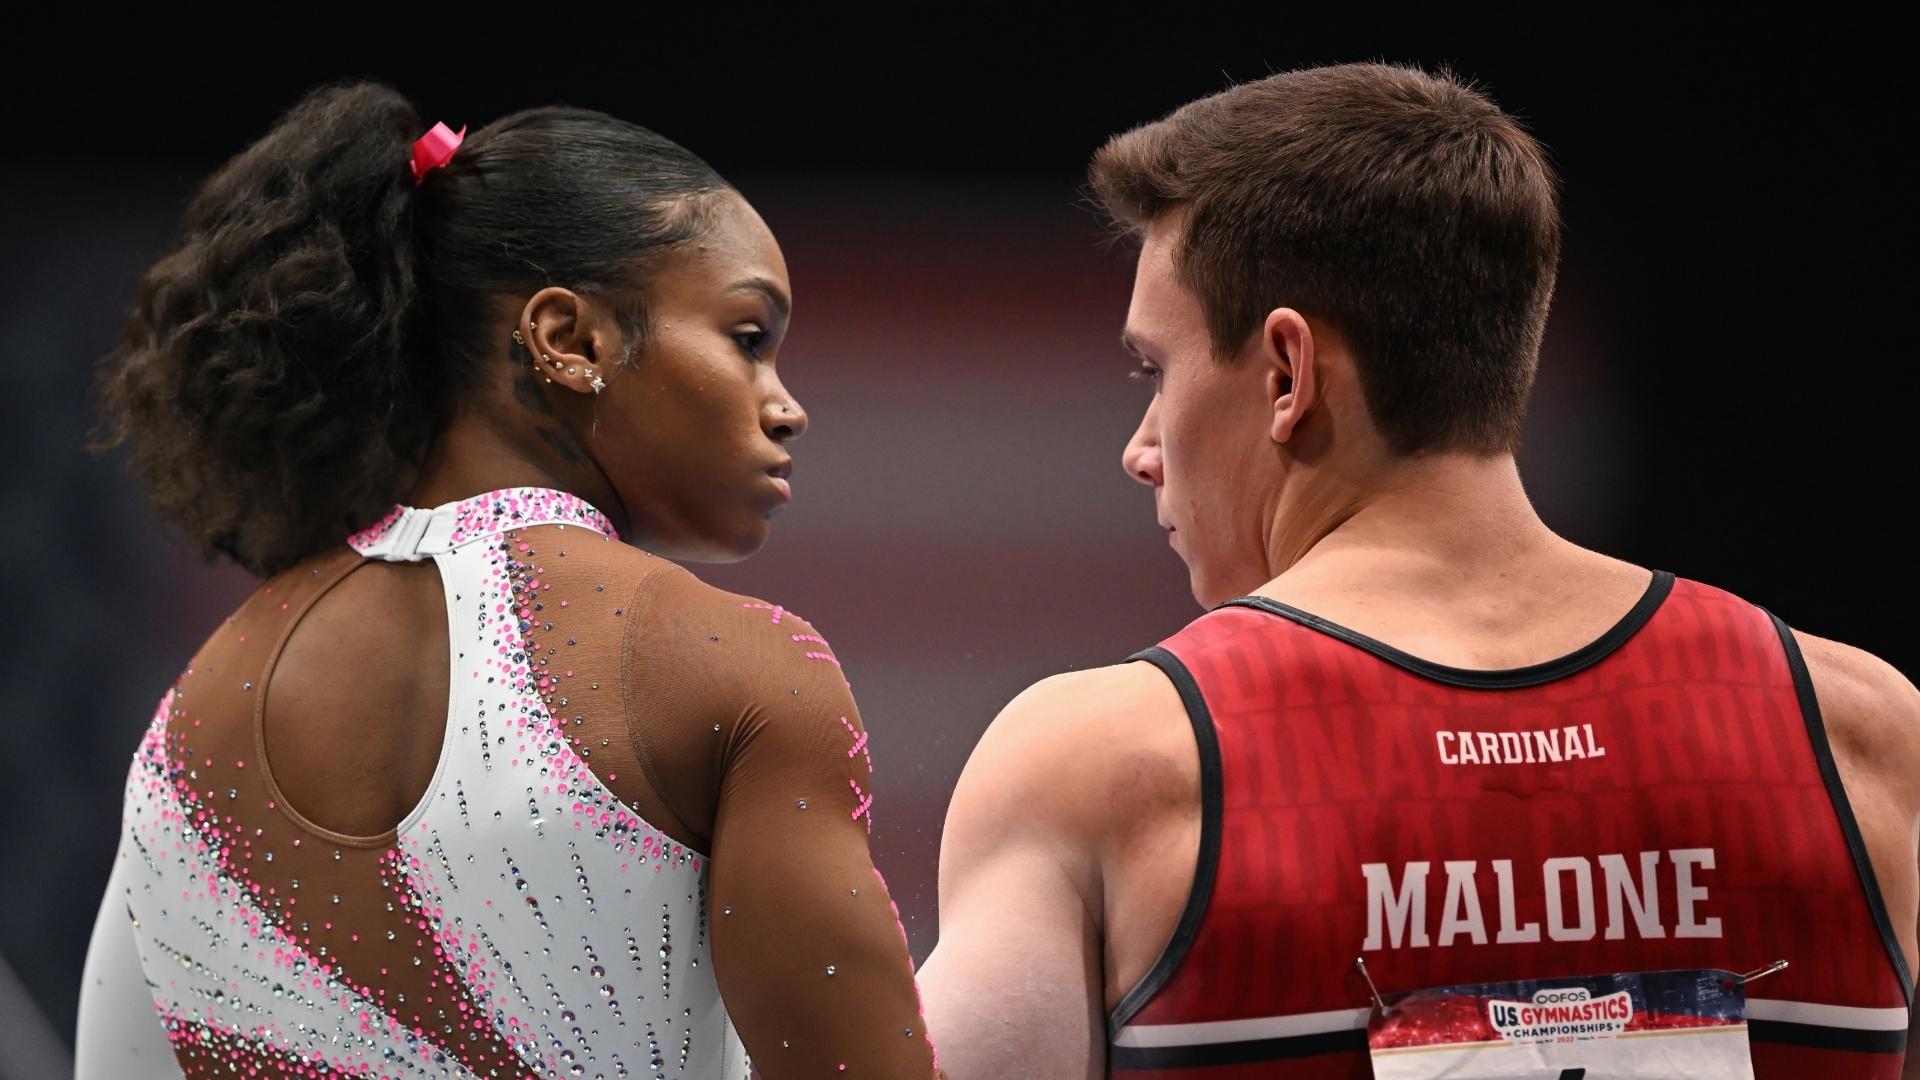 Shilese Jones (left) and Brody Malone (right) at the 2022 OOFOS U.S. Gymnastics Championships in Tampa, Florida.